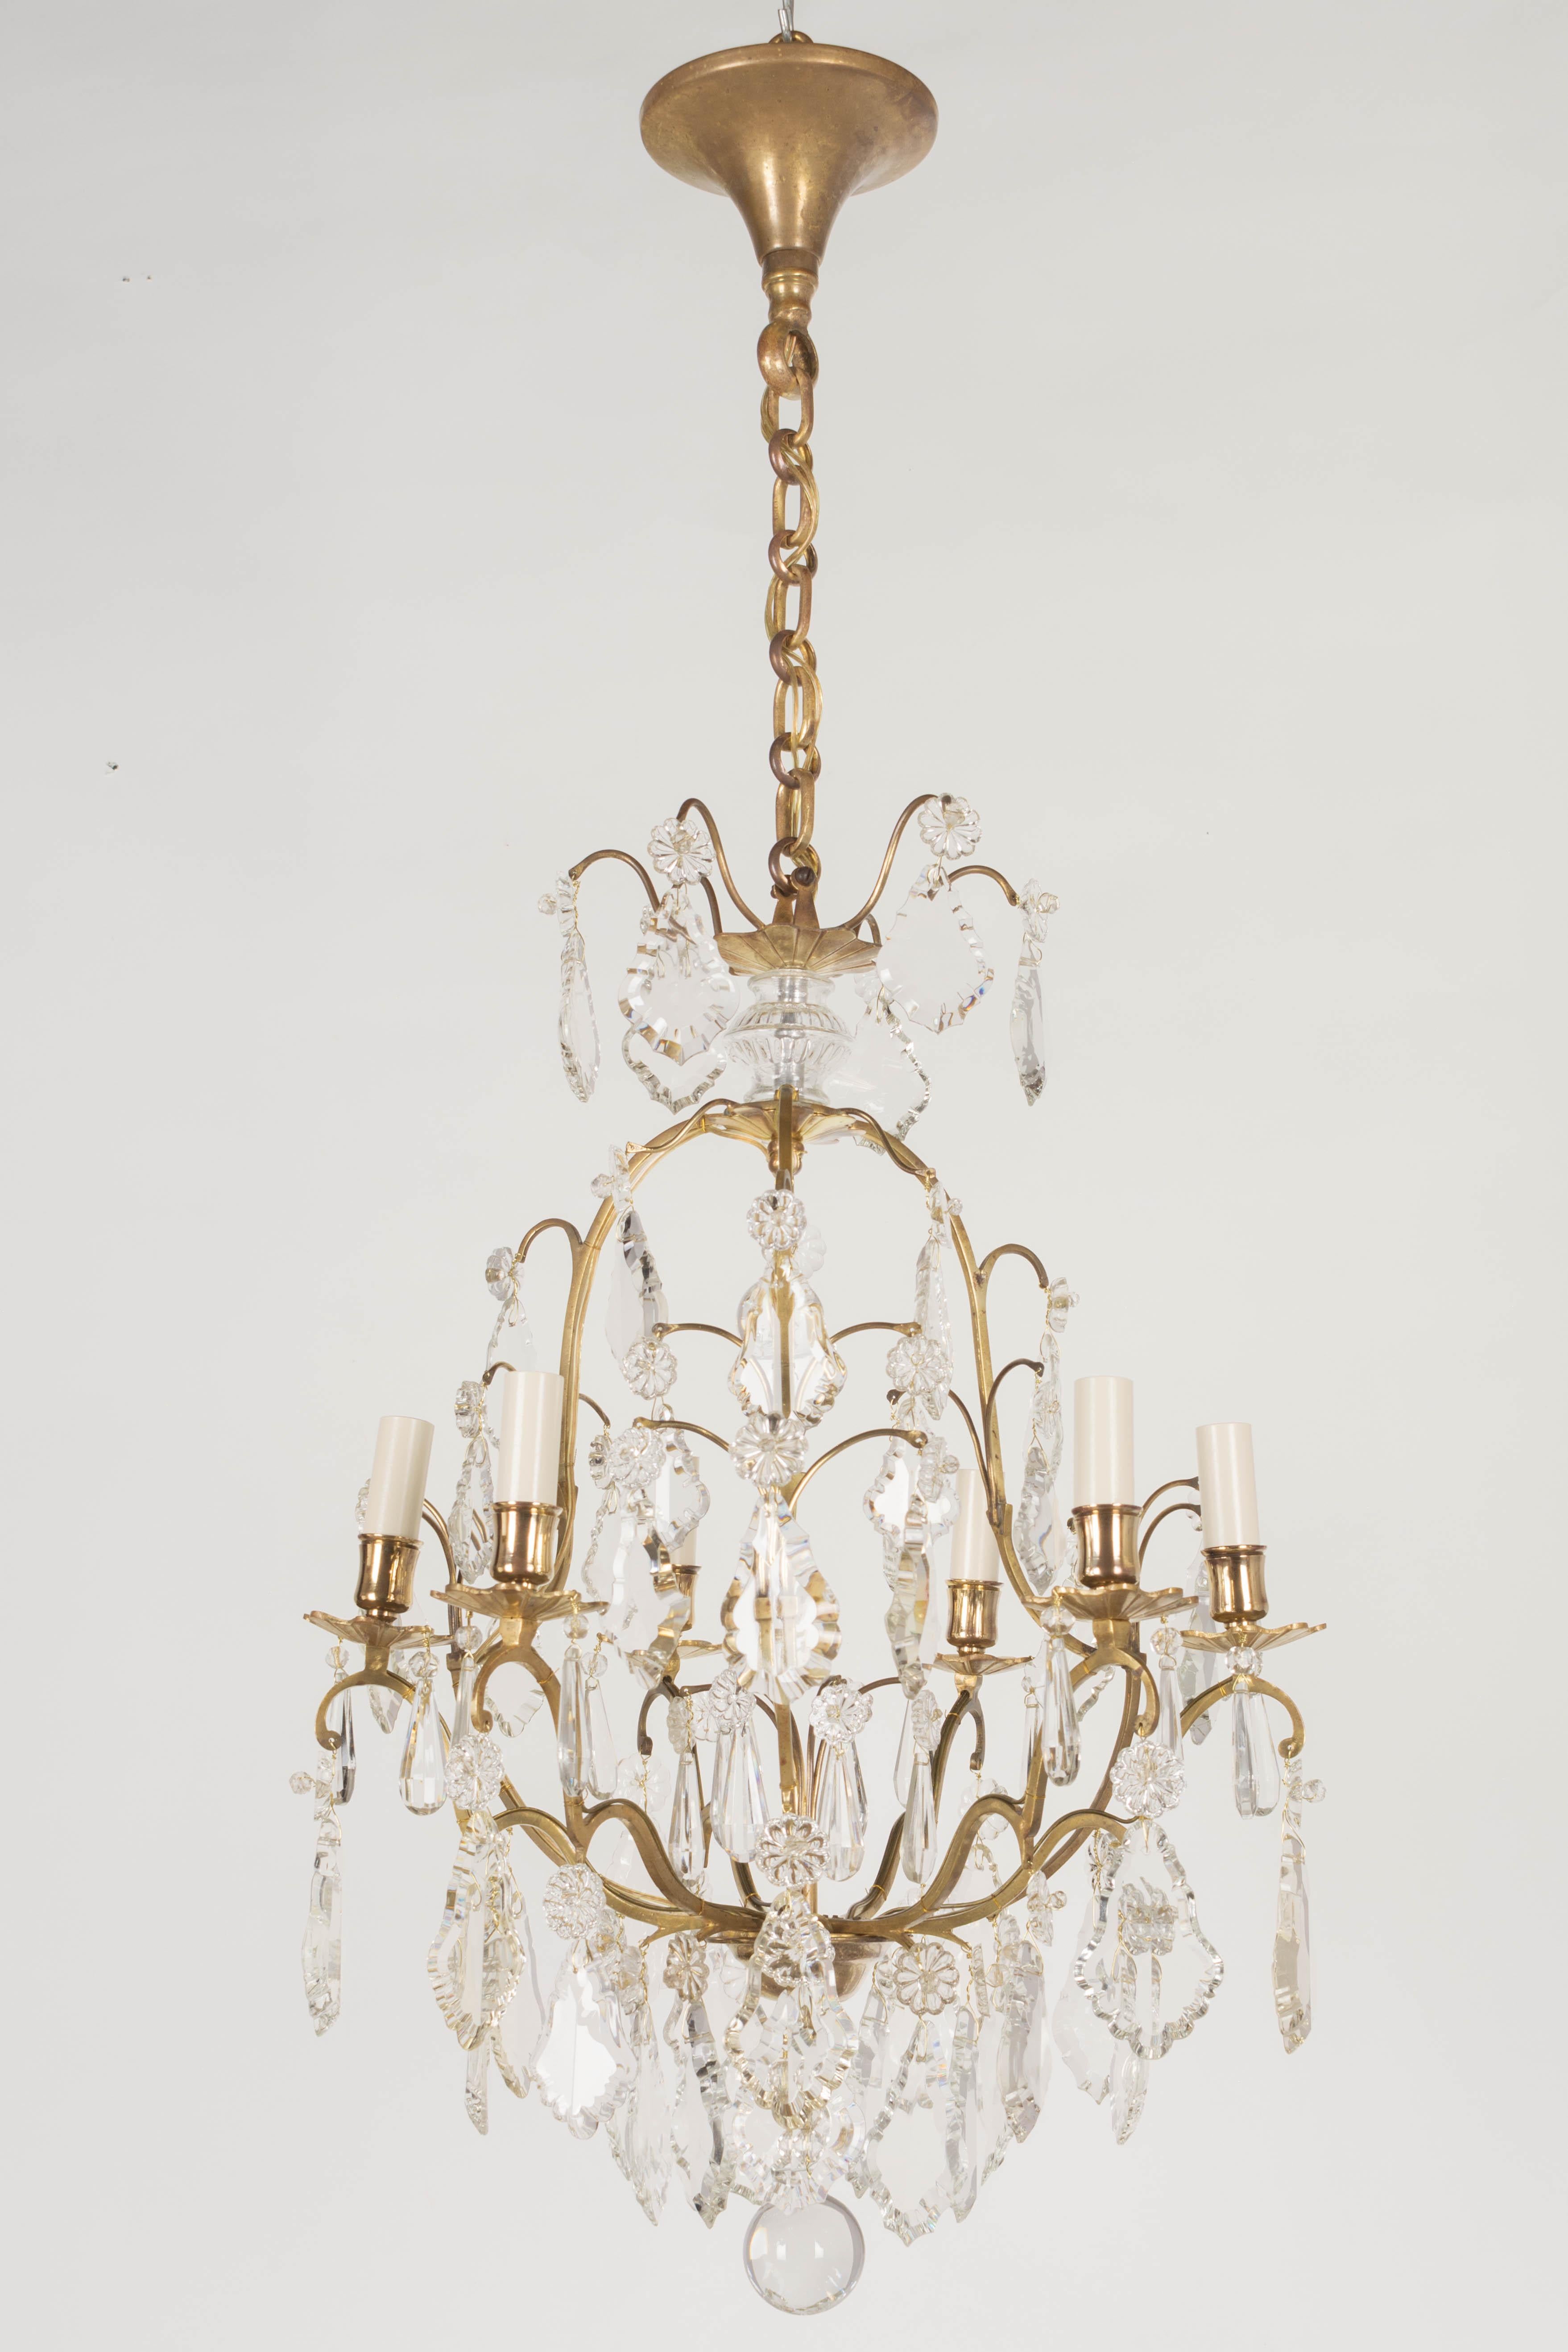 A French Louis XV style six-light chandelier with an assortment of crystal prisms and pendalogues with rosettes, center column, and crystal spheres. Solid brass birdcage frame with cast brass bobeches has been cleaned and polished but not lacquered.